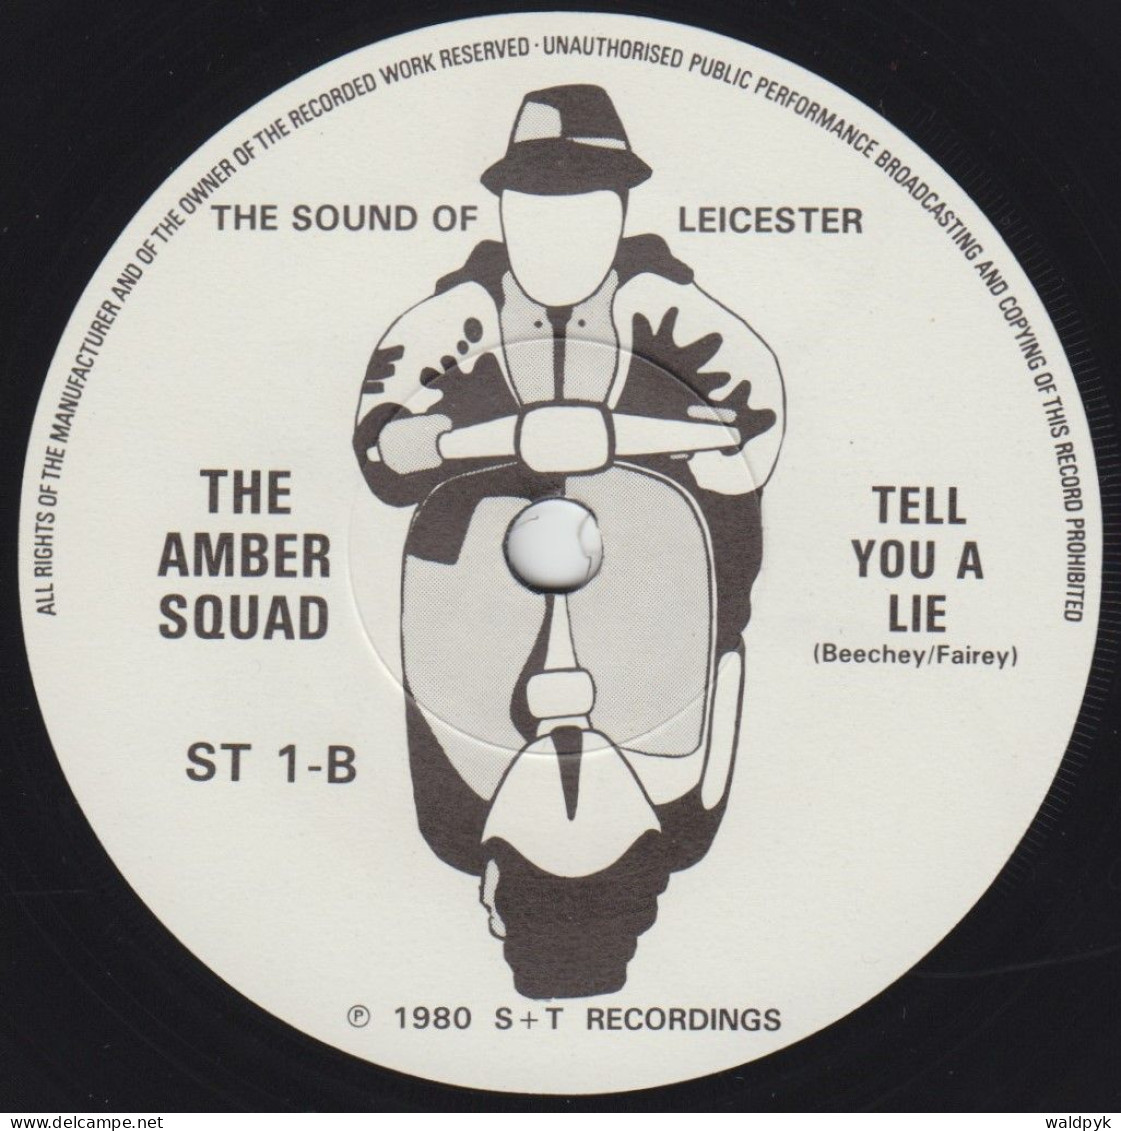 THE AMBER SQUAD - I Can't Put My Finger On You - Other - English Music